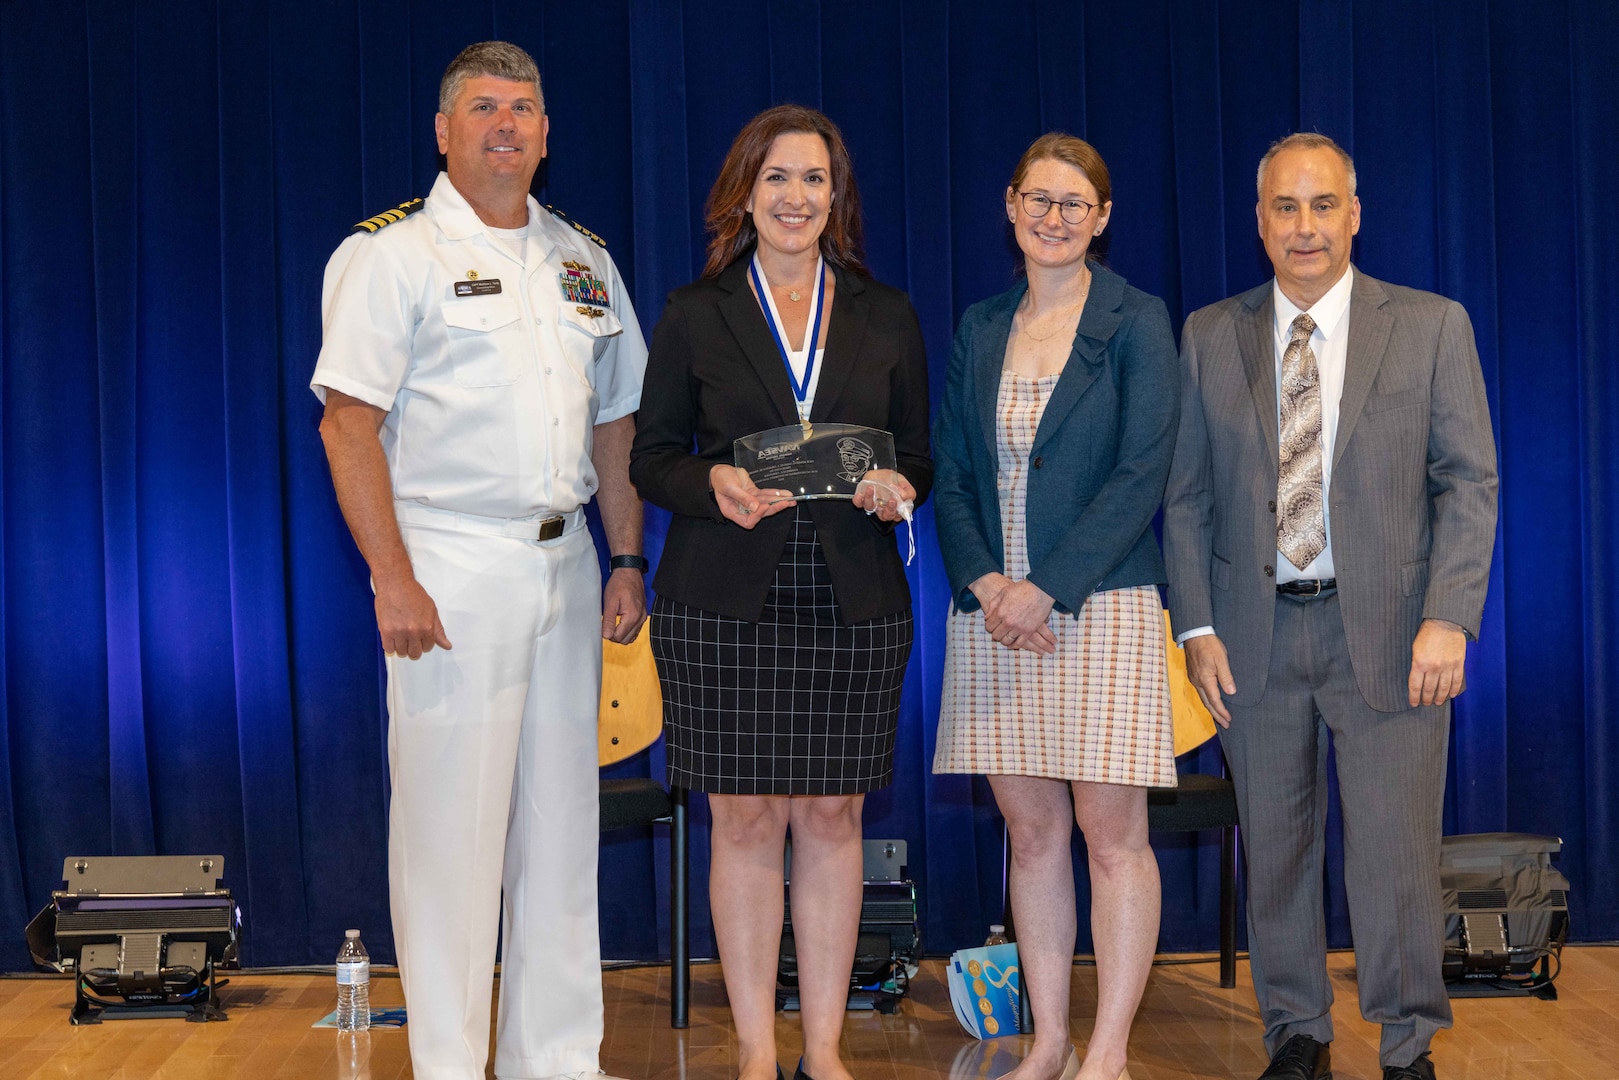 Naval Surface Warfare Center, Carderock Division's Commanding Officer Capt. Matthew Tardy (left), Technical Director Larry Tarasek (right) and Nancy Adler (second to right), the Platform Integrity Department's Deputy Department Head, present the Vice Adm. Samuel L. Gravely Jr. Award for Achievement in Diversity and Inclusion to Danielle Gerstner (second to left), Materials for Advanced Systems and Sensors Branch Head, during Carderock's Magnificent Eight Award ceremony in West Bethesda, Md., on June 13. (U.S. Navy photo by Aaron Thomas)